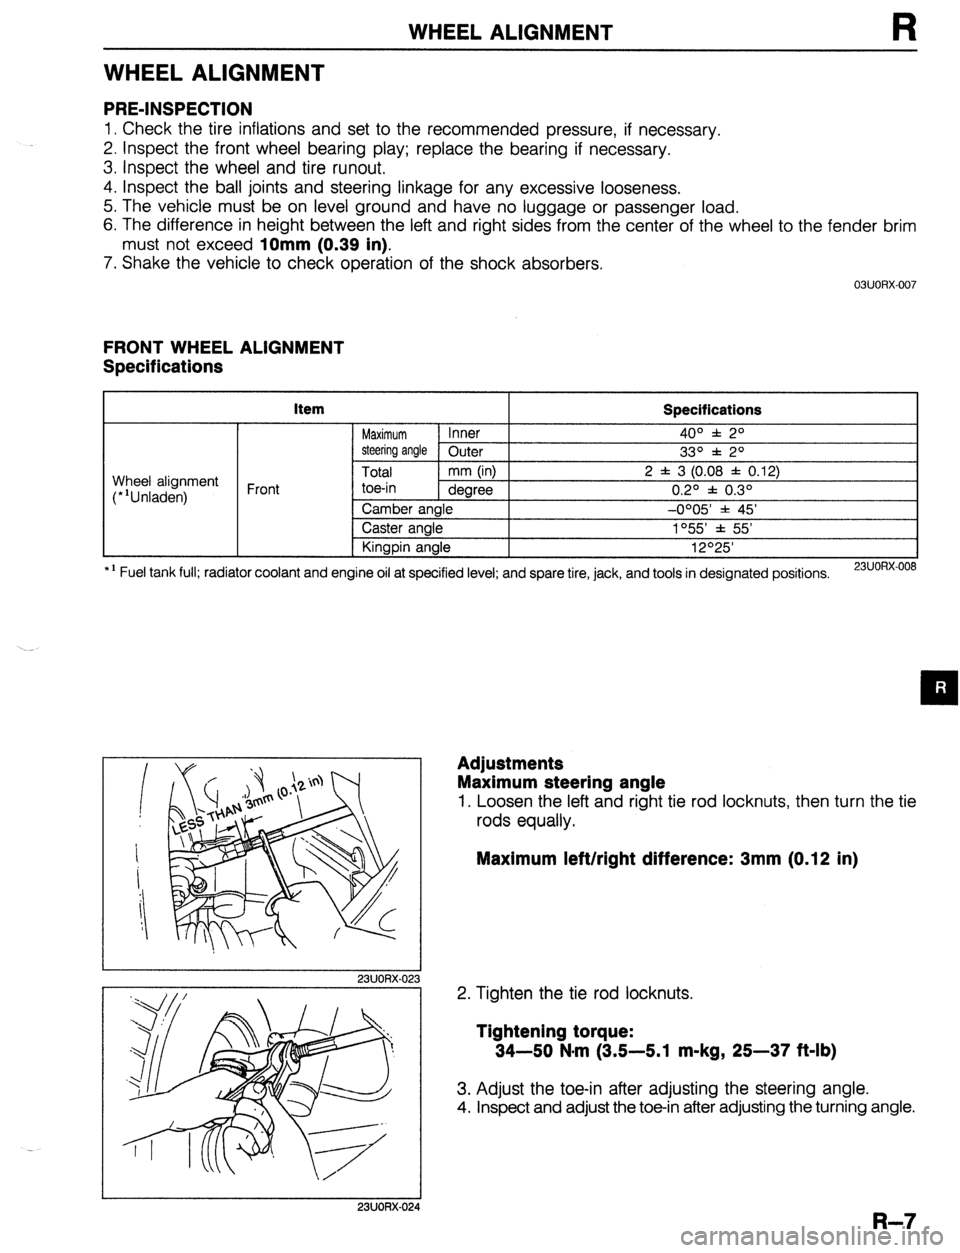 MAZDA PROTEGE 1992  Workshop Manual WHEEL ALIGNMENT 
WHEEL ALIGNMENT 
PRE-INSPECTION 
1. Check the tire inflations and set to the recommended pressure, if necessary. 
2. Inspect the front wheel bearing play; replace the bearing if neces